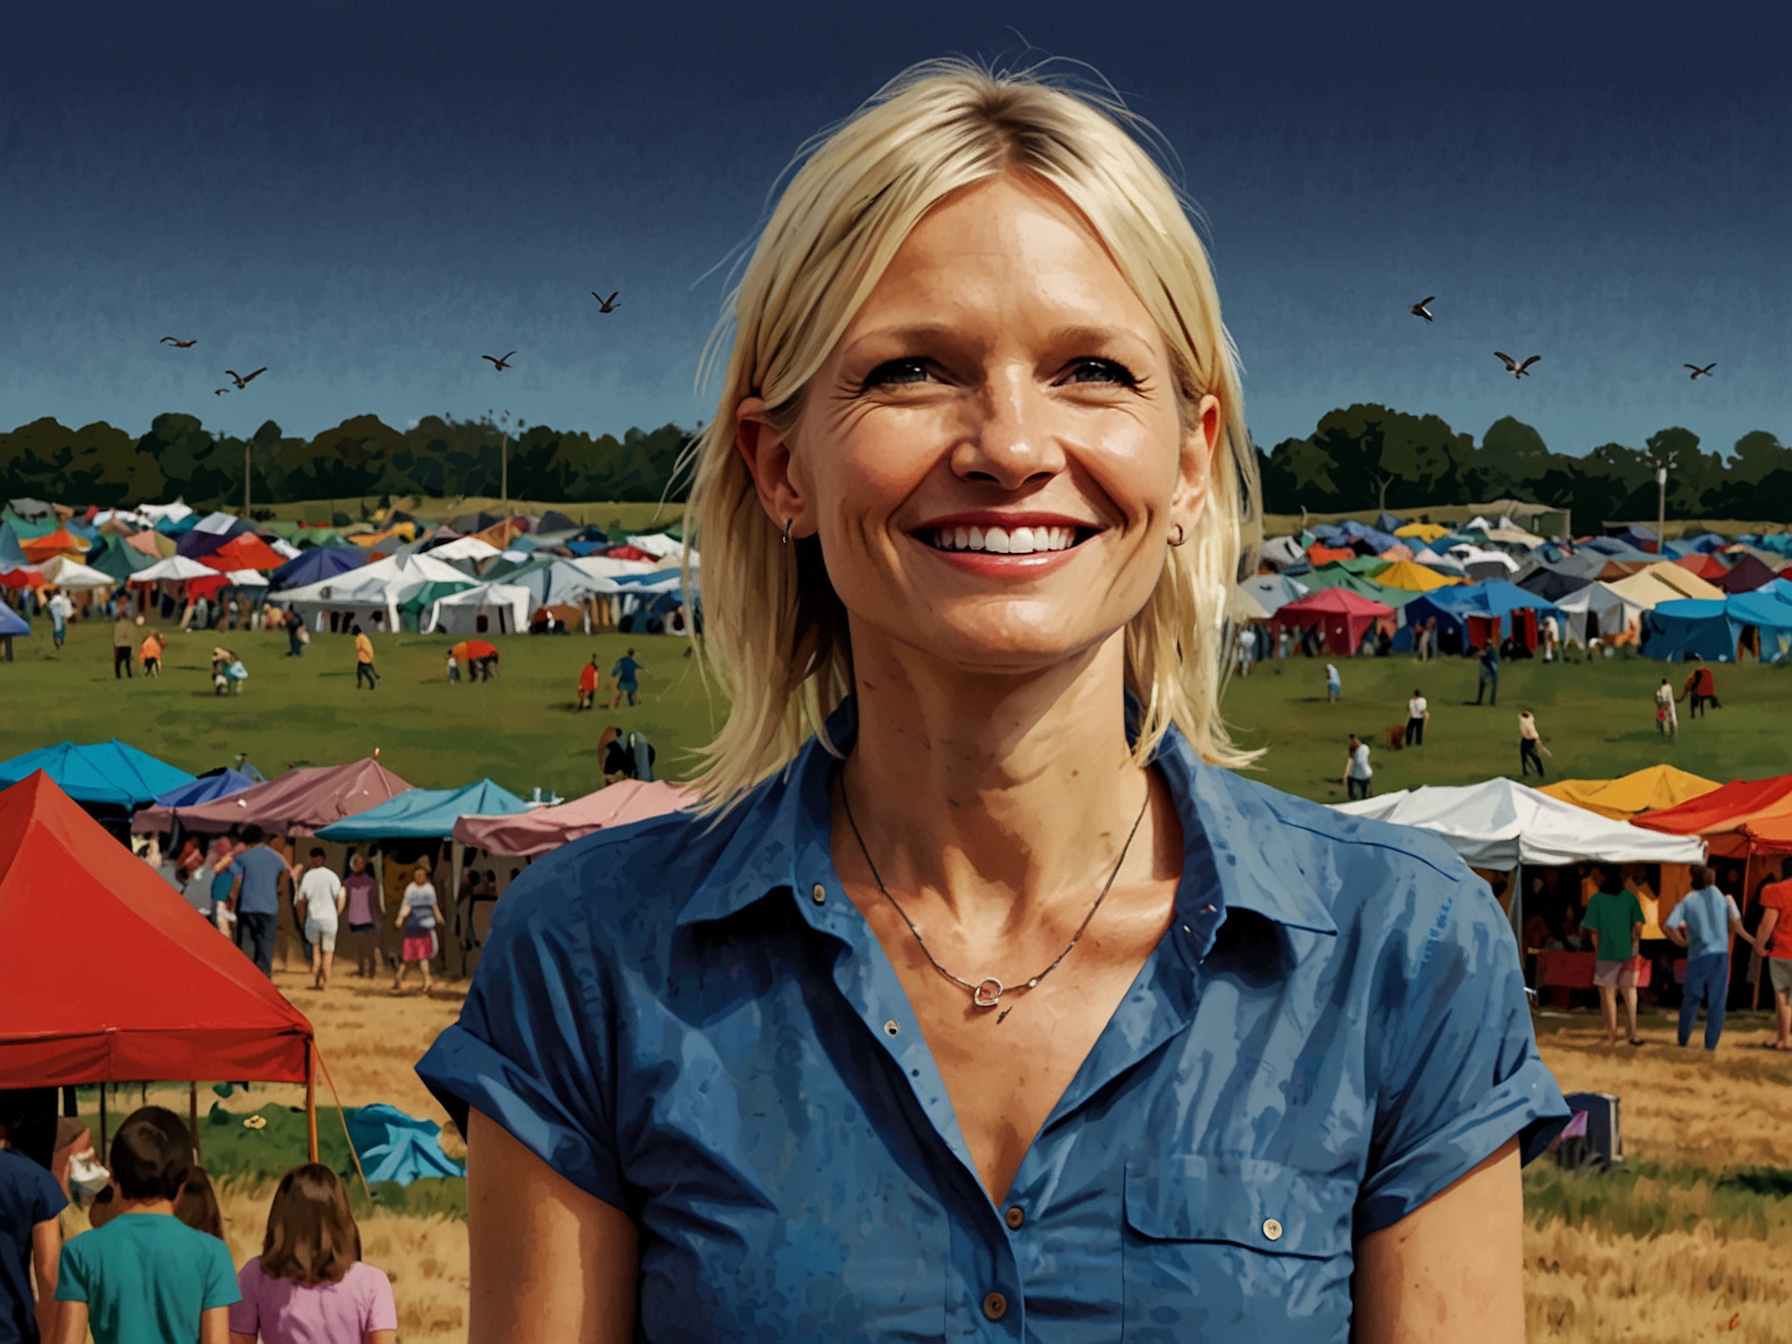 Jo Whiley, the seasoned BBC presenter, engages with Glastonbury Festival's vibrant atmosphere, but viewers notice signs of fatigue and discomfort, sparking widespread concern for her well-being.